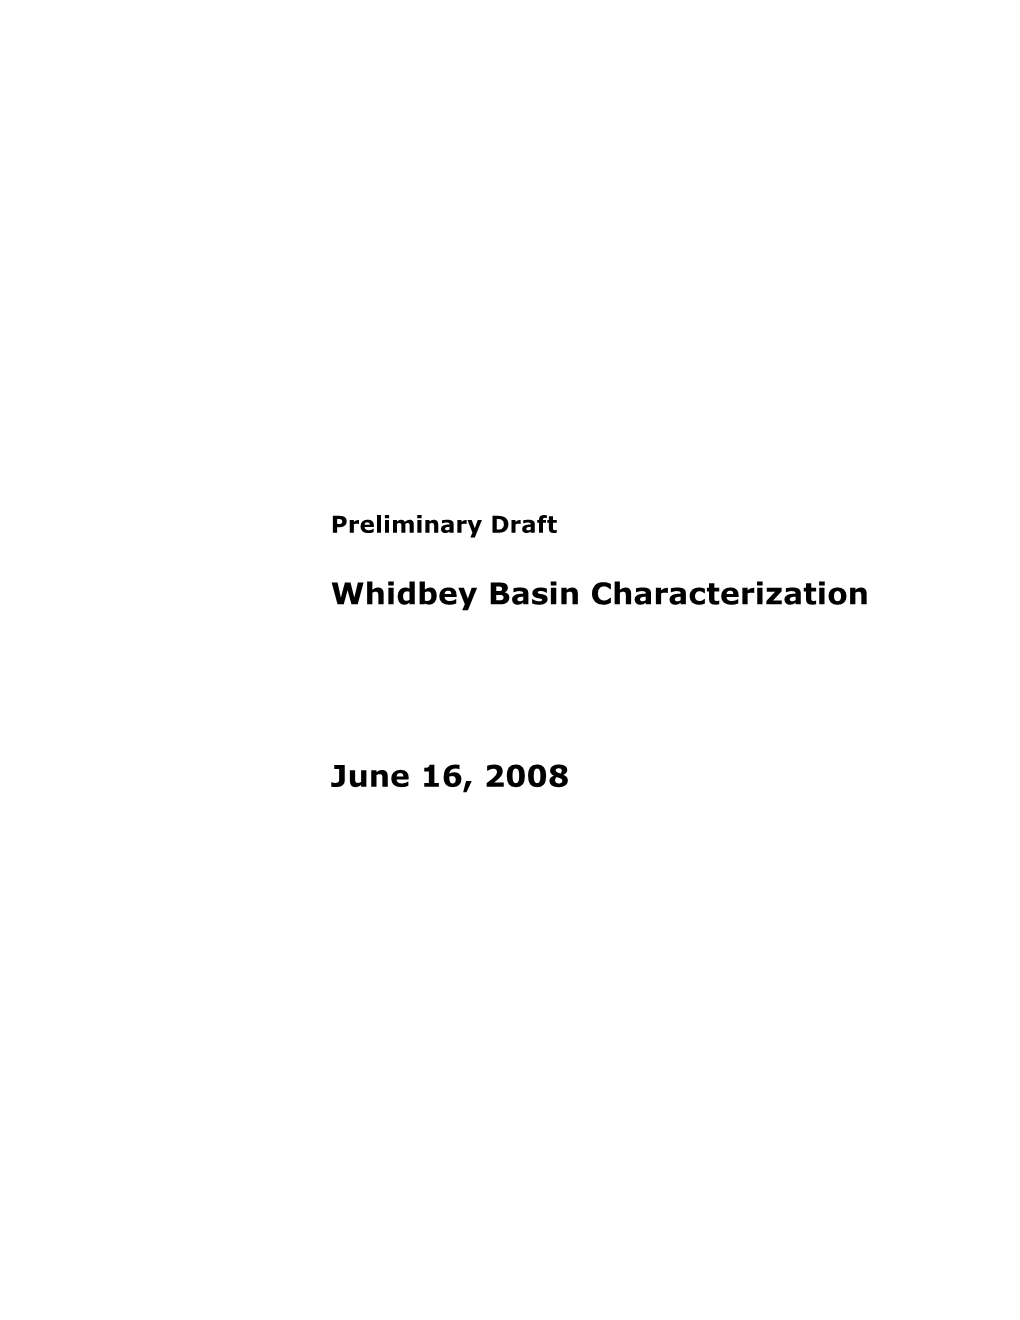 Draft Whidbey Basin Characterization Page 1 June 16, 2008